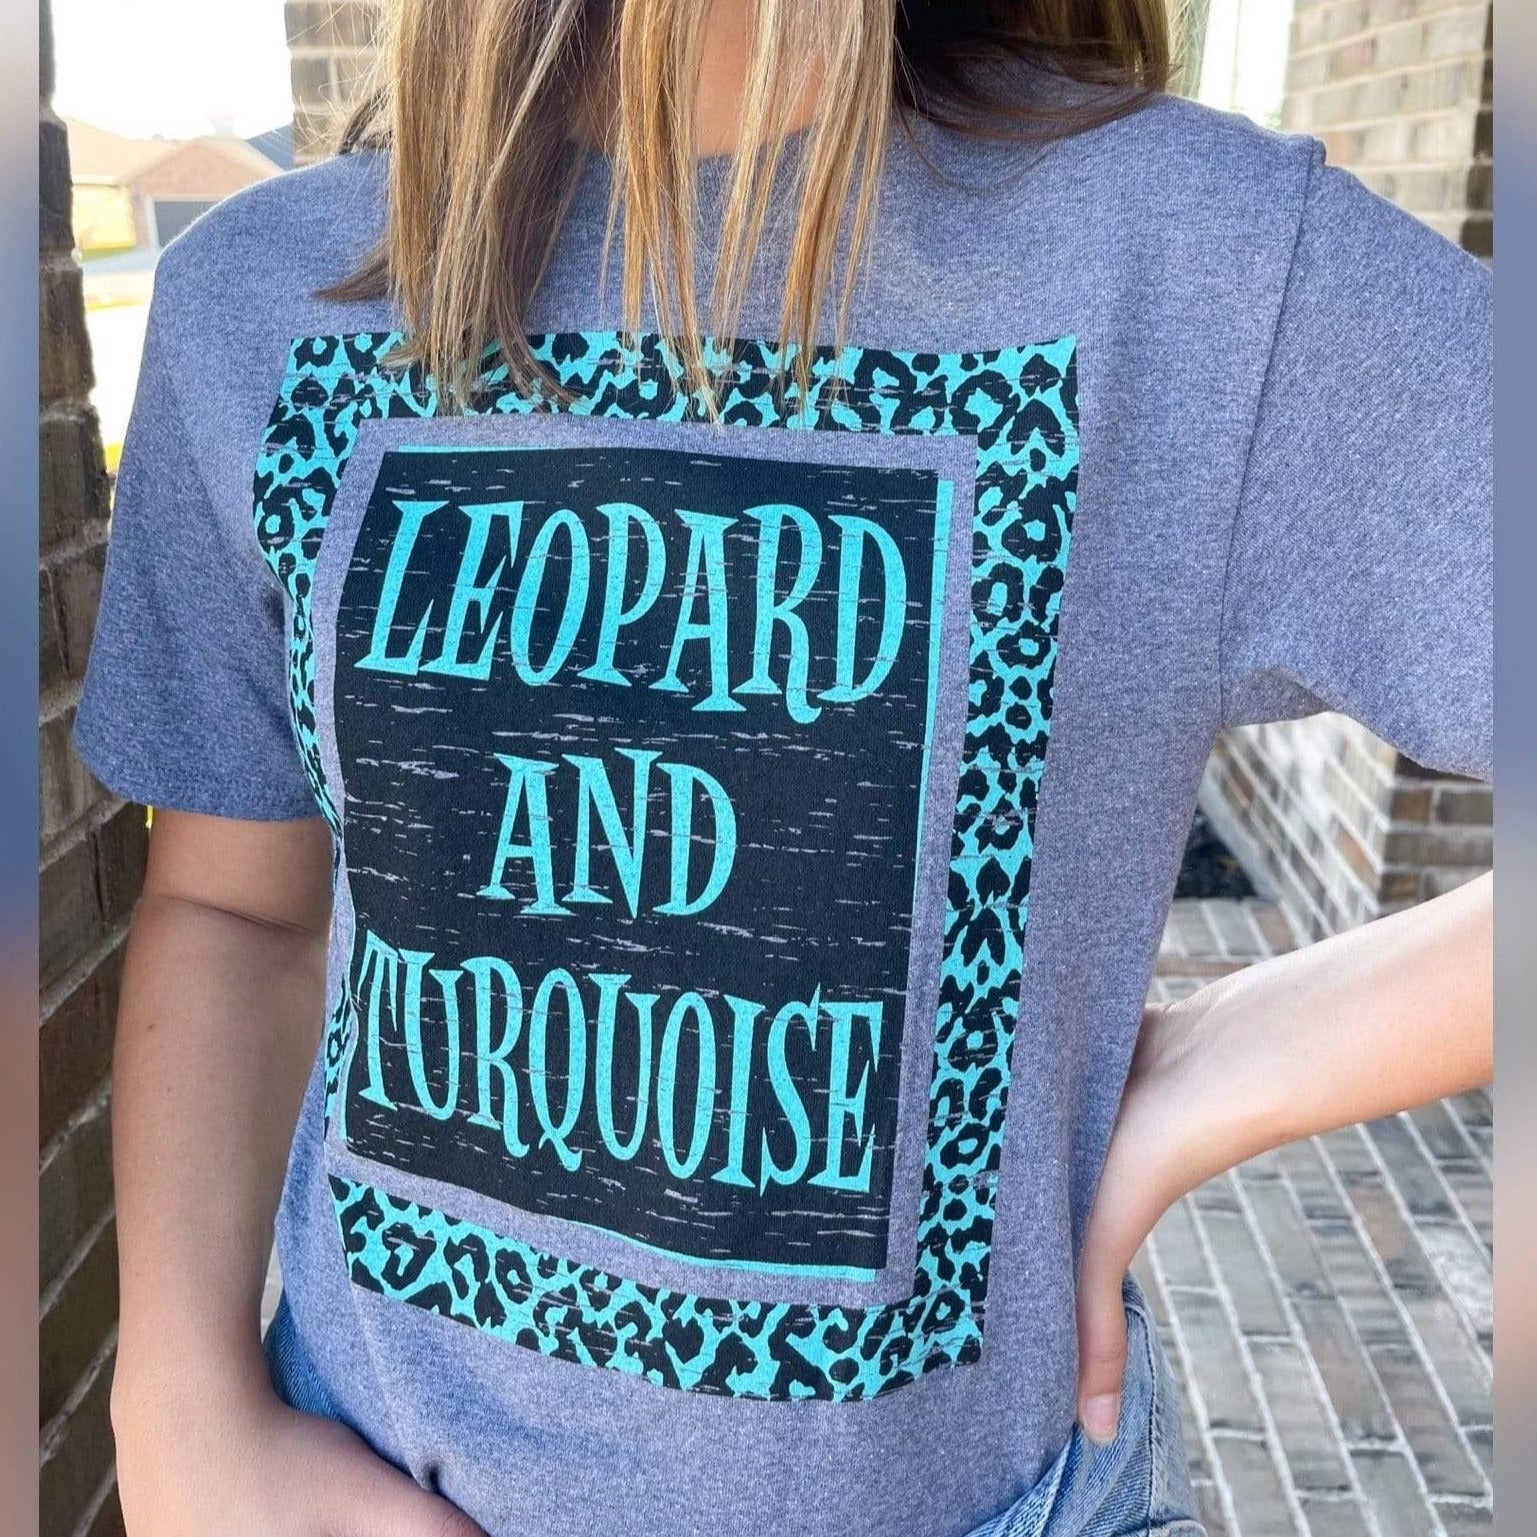 Leopard and Turquoise Graphic - Envy Stylz Boutique